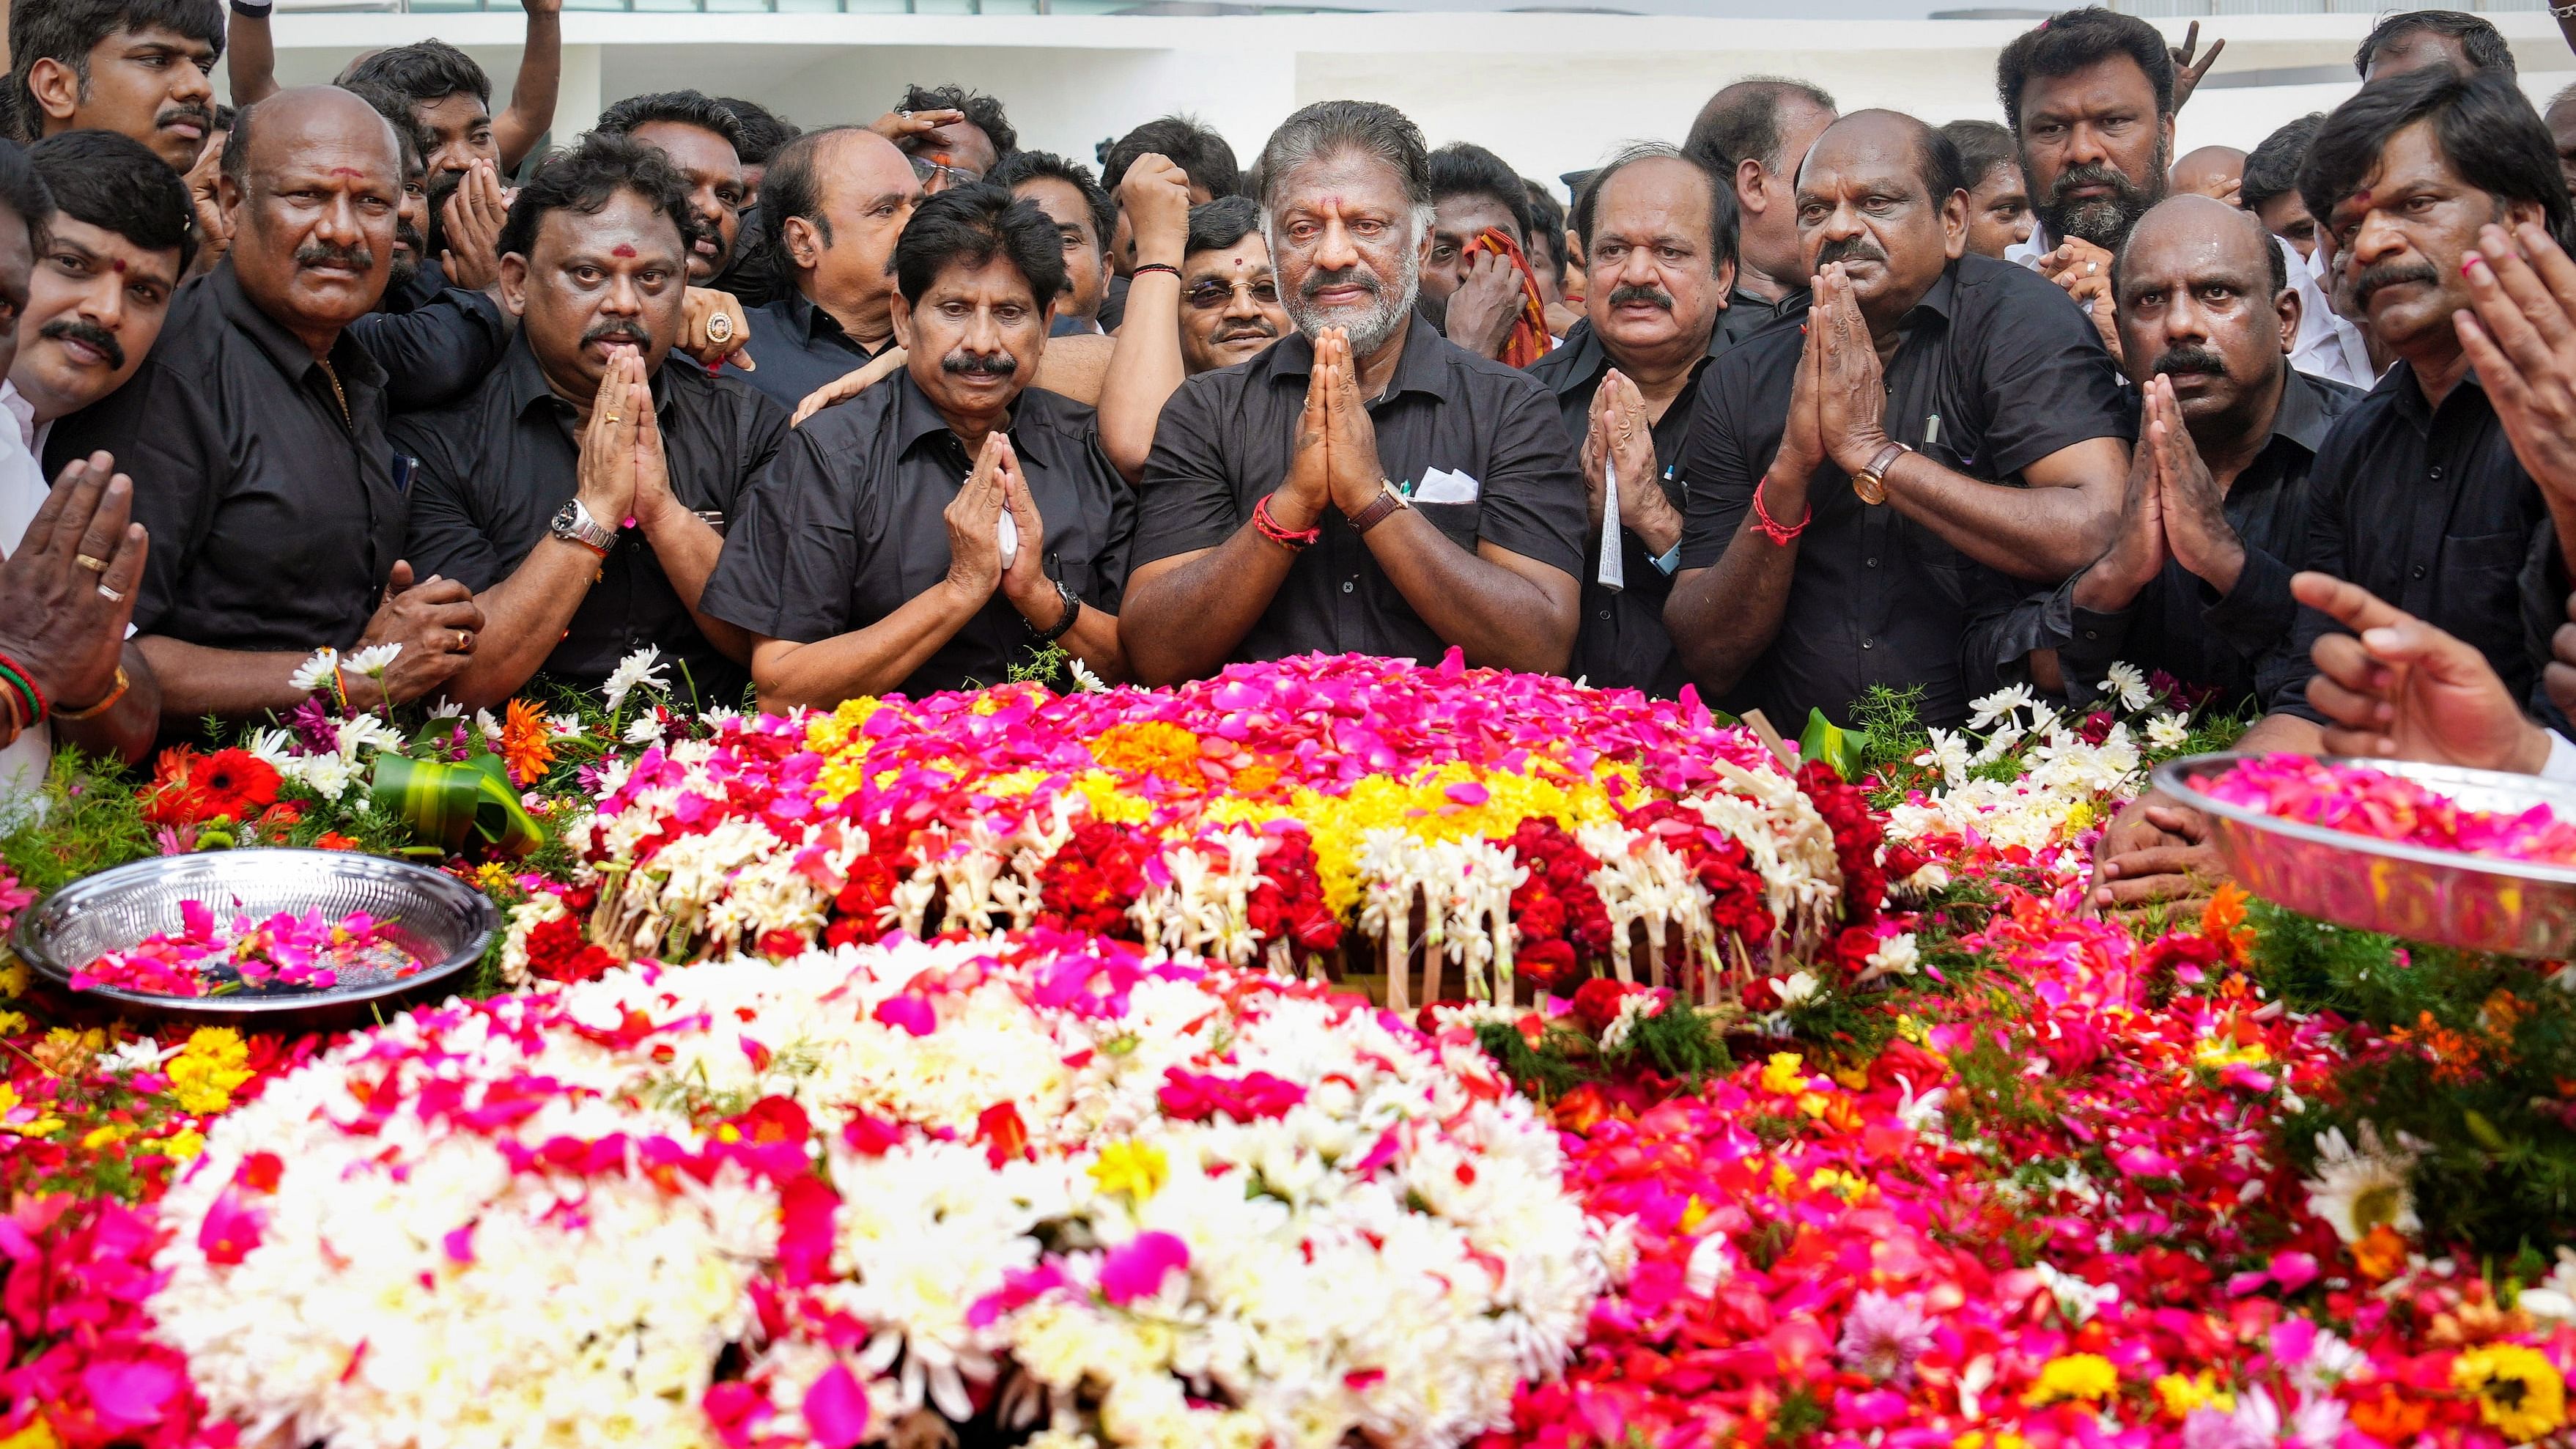 Former AIADMK coordinator O. Panneerselvam pays tribute to former Tamil Nadu chief minister J Jayalalithaa on her death anniversary, at her memorial in Chennai. Credit: PTI Photo